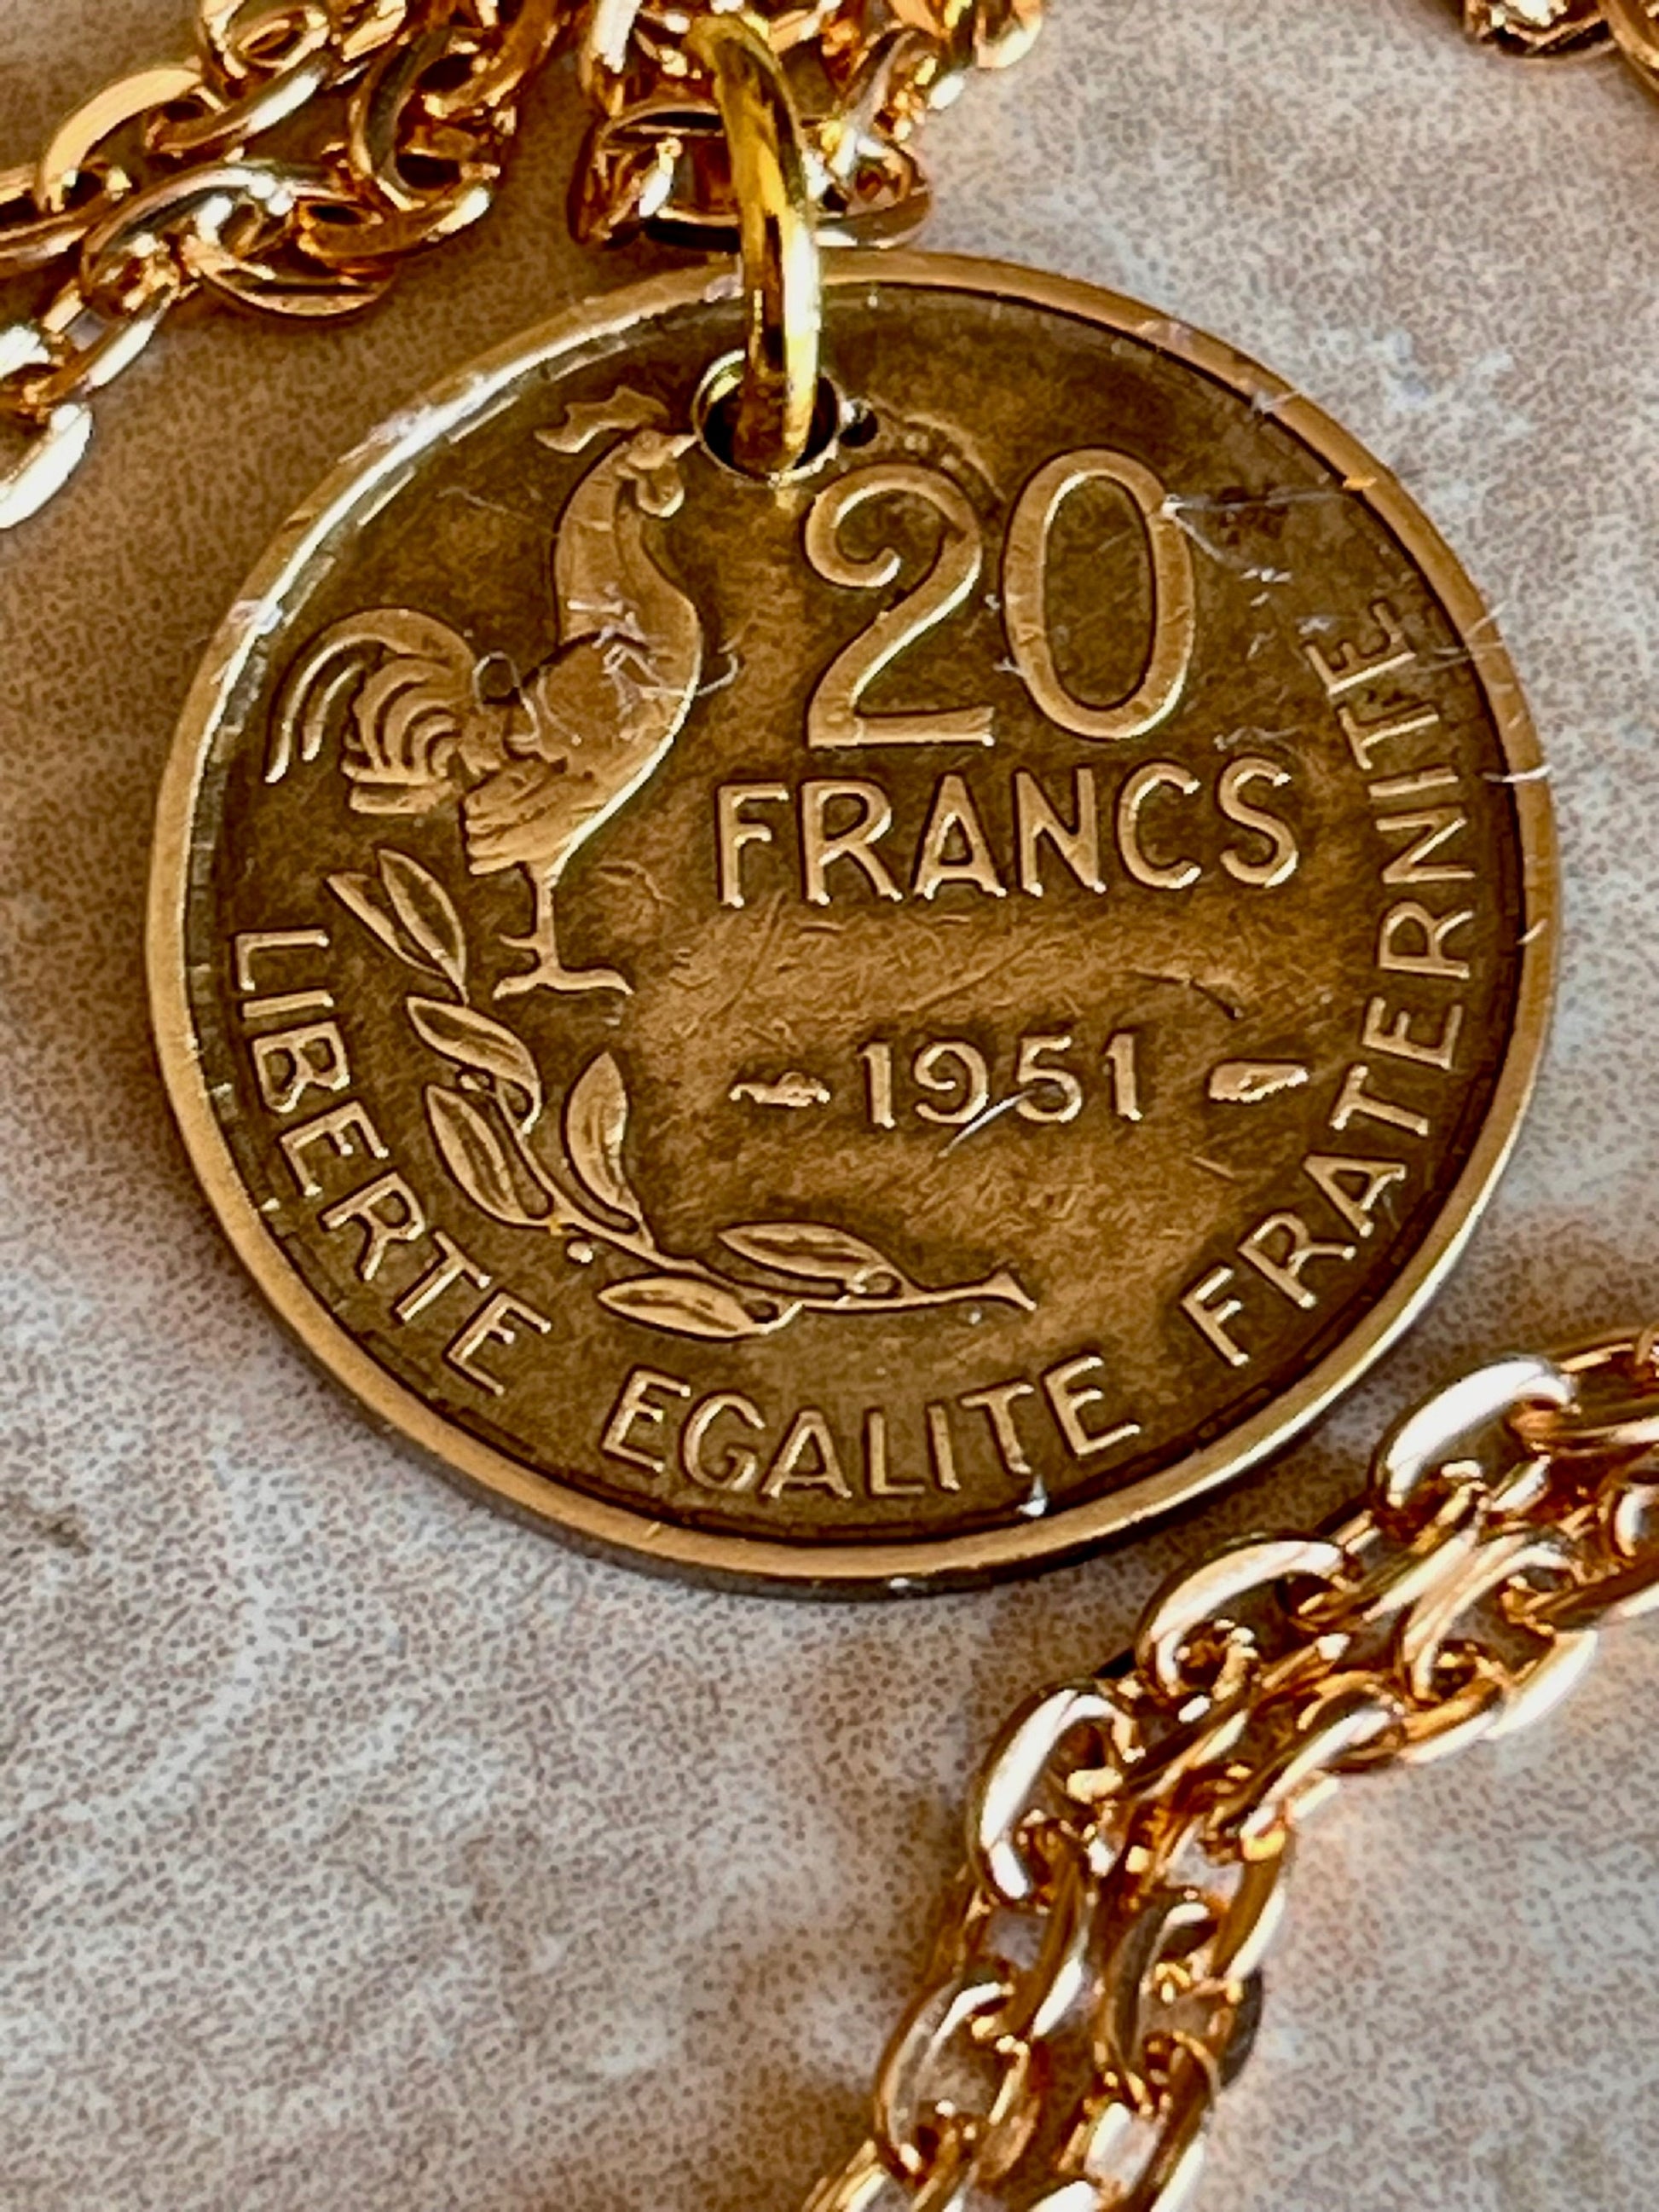 France Coin Necklace French 20 Francs Custom Pendant Custom Made Charm Gift For Friend Coin Charm Gift For Him, Coin Collector, World Coins